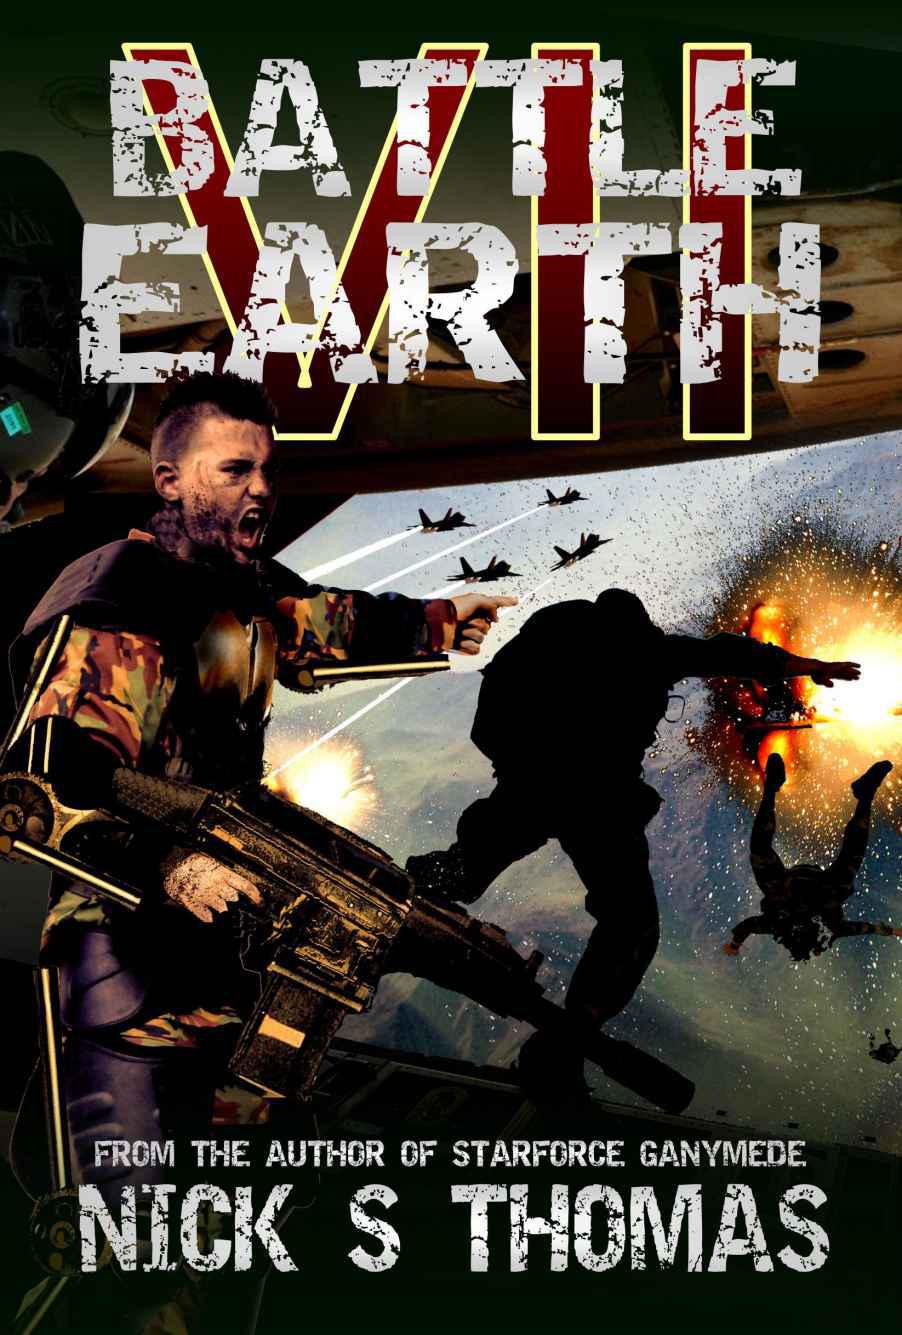 Battle Earth. Solaria – the Hunt from the Battle for Earth.